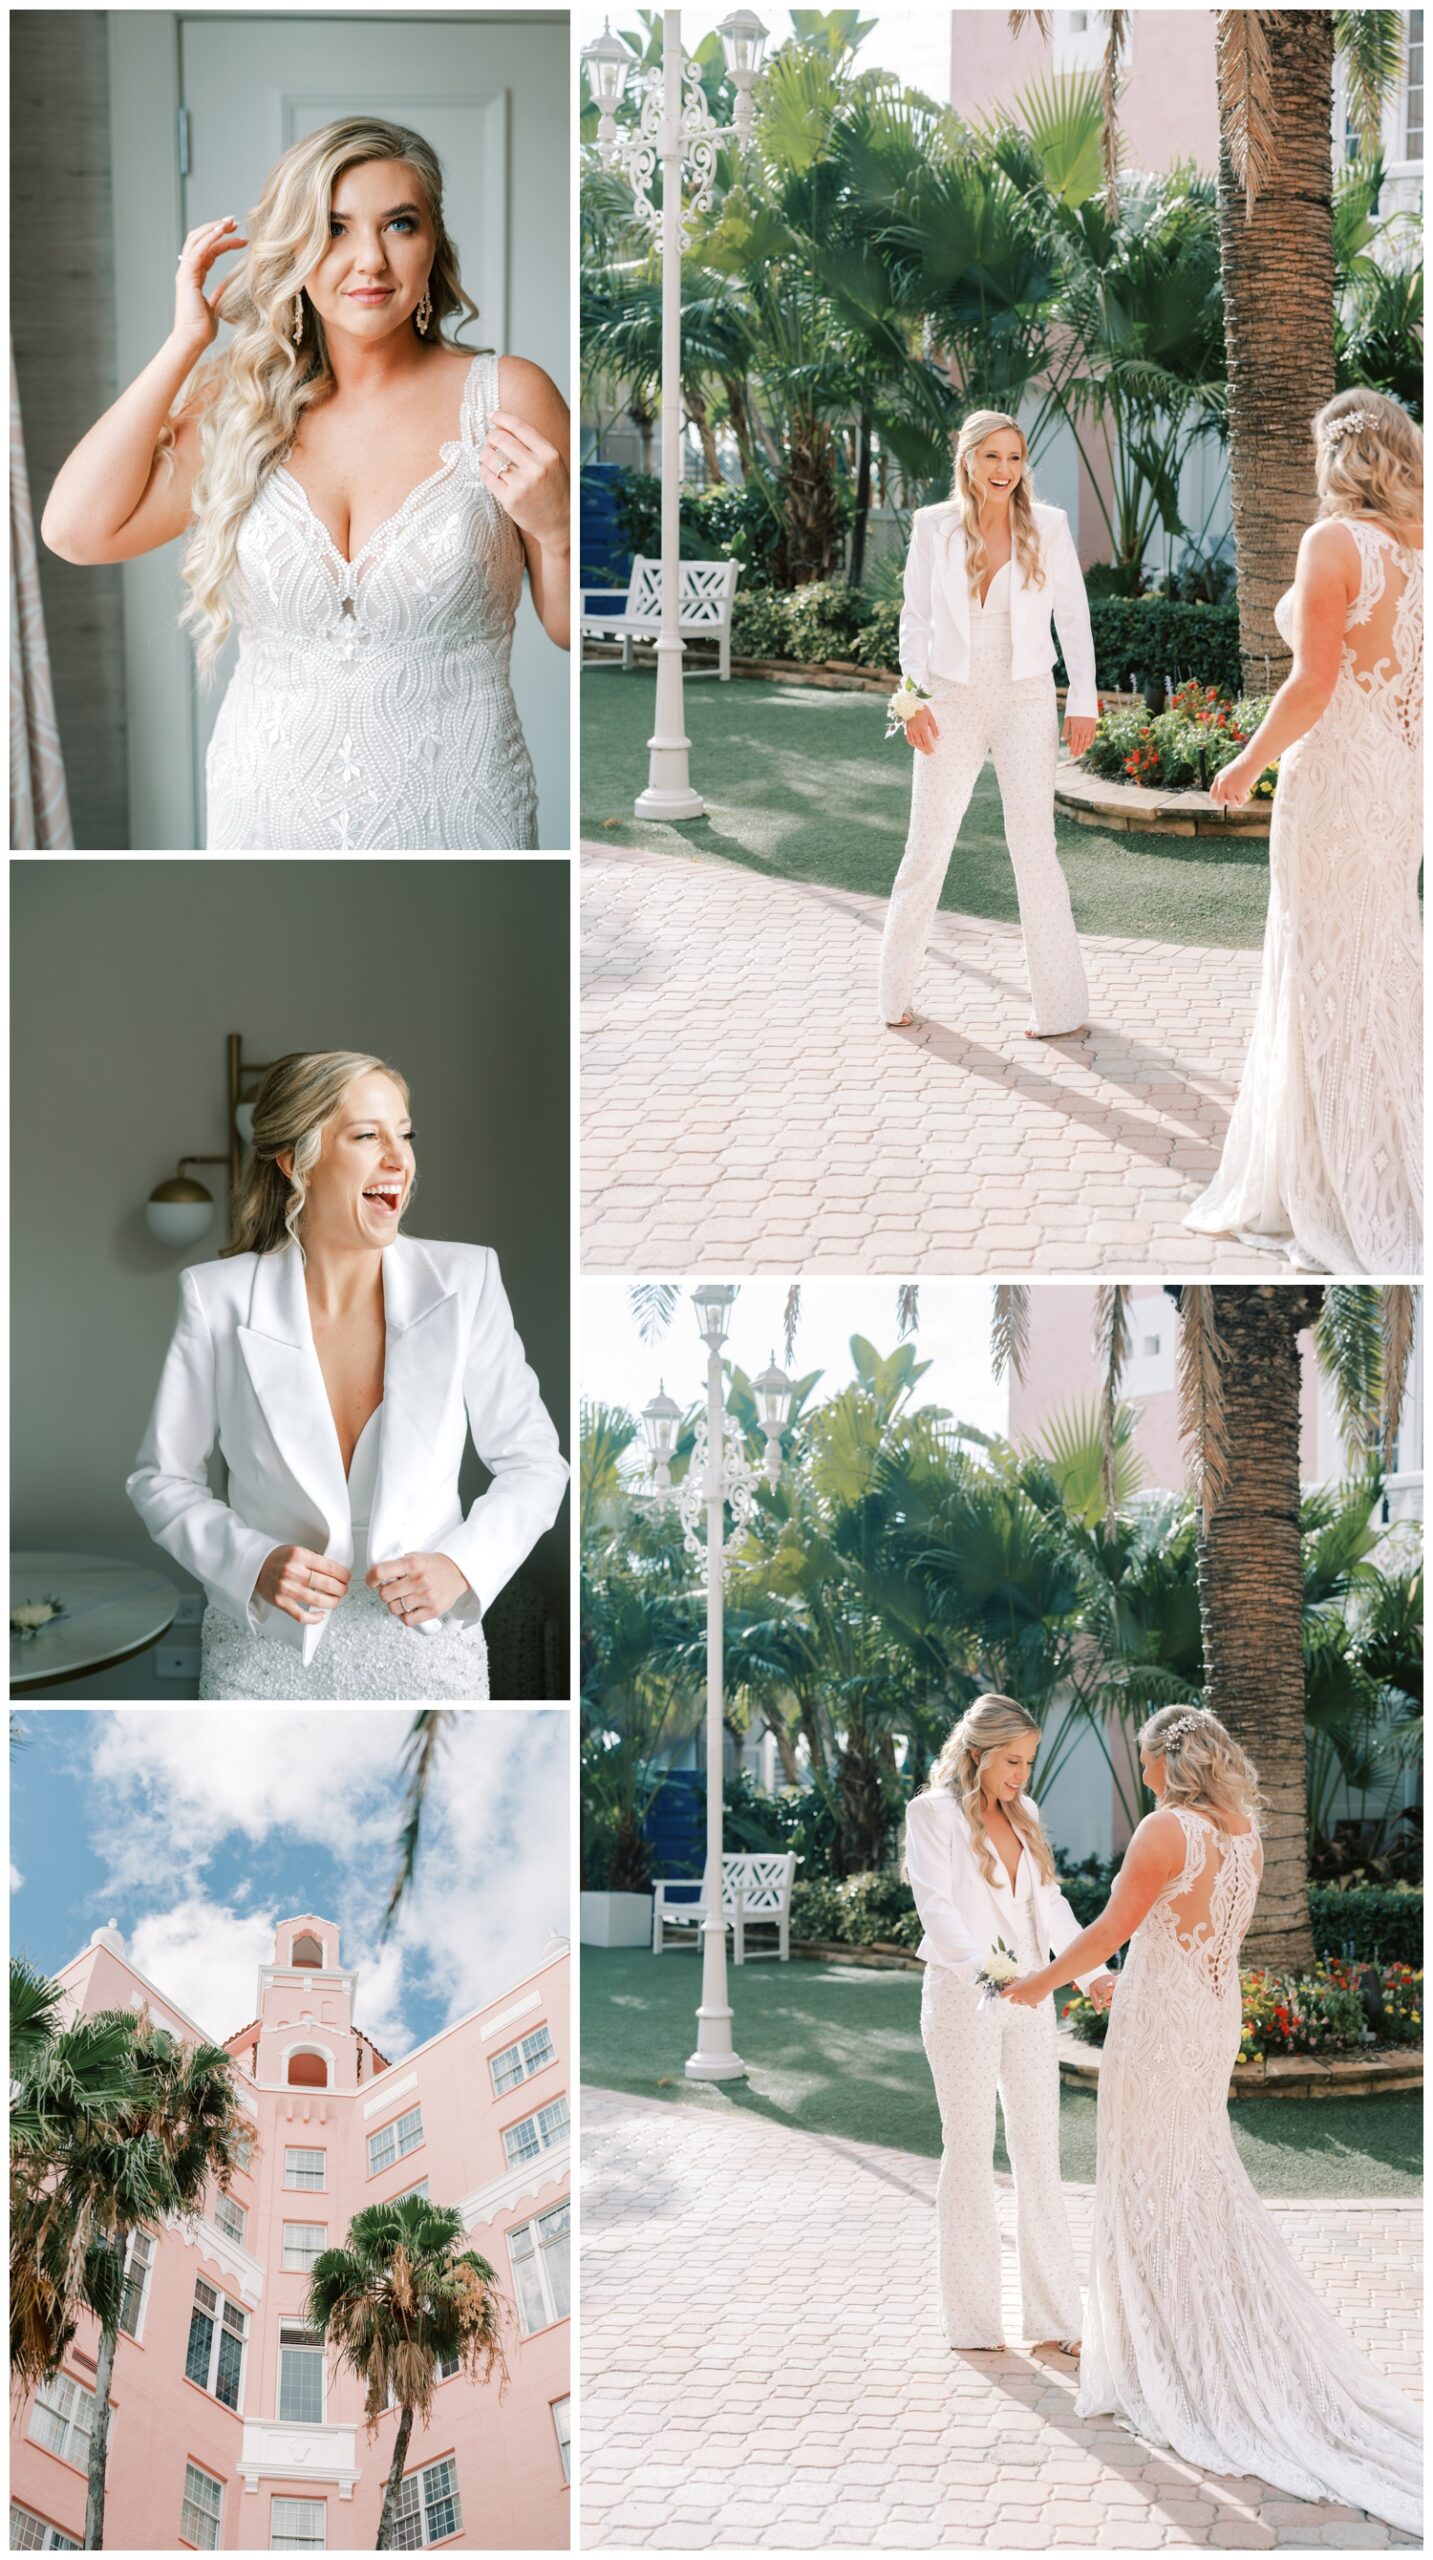 first look photos in Florida - stephanie lanni photography, lasting luxe artistry, st pete elopement package